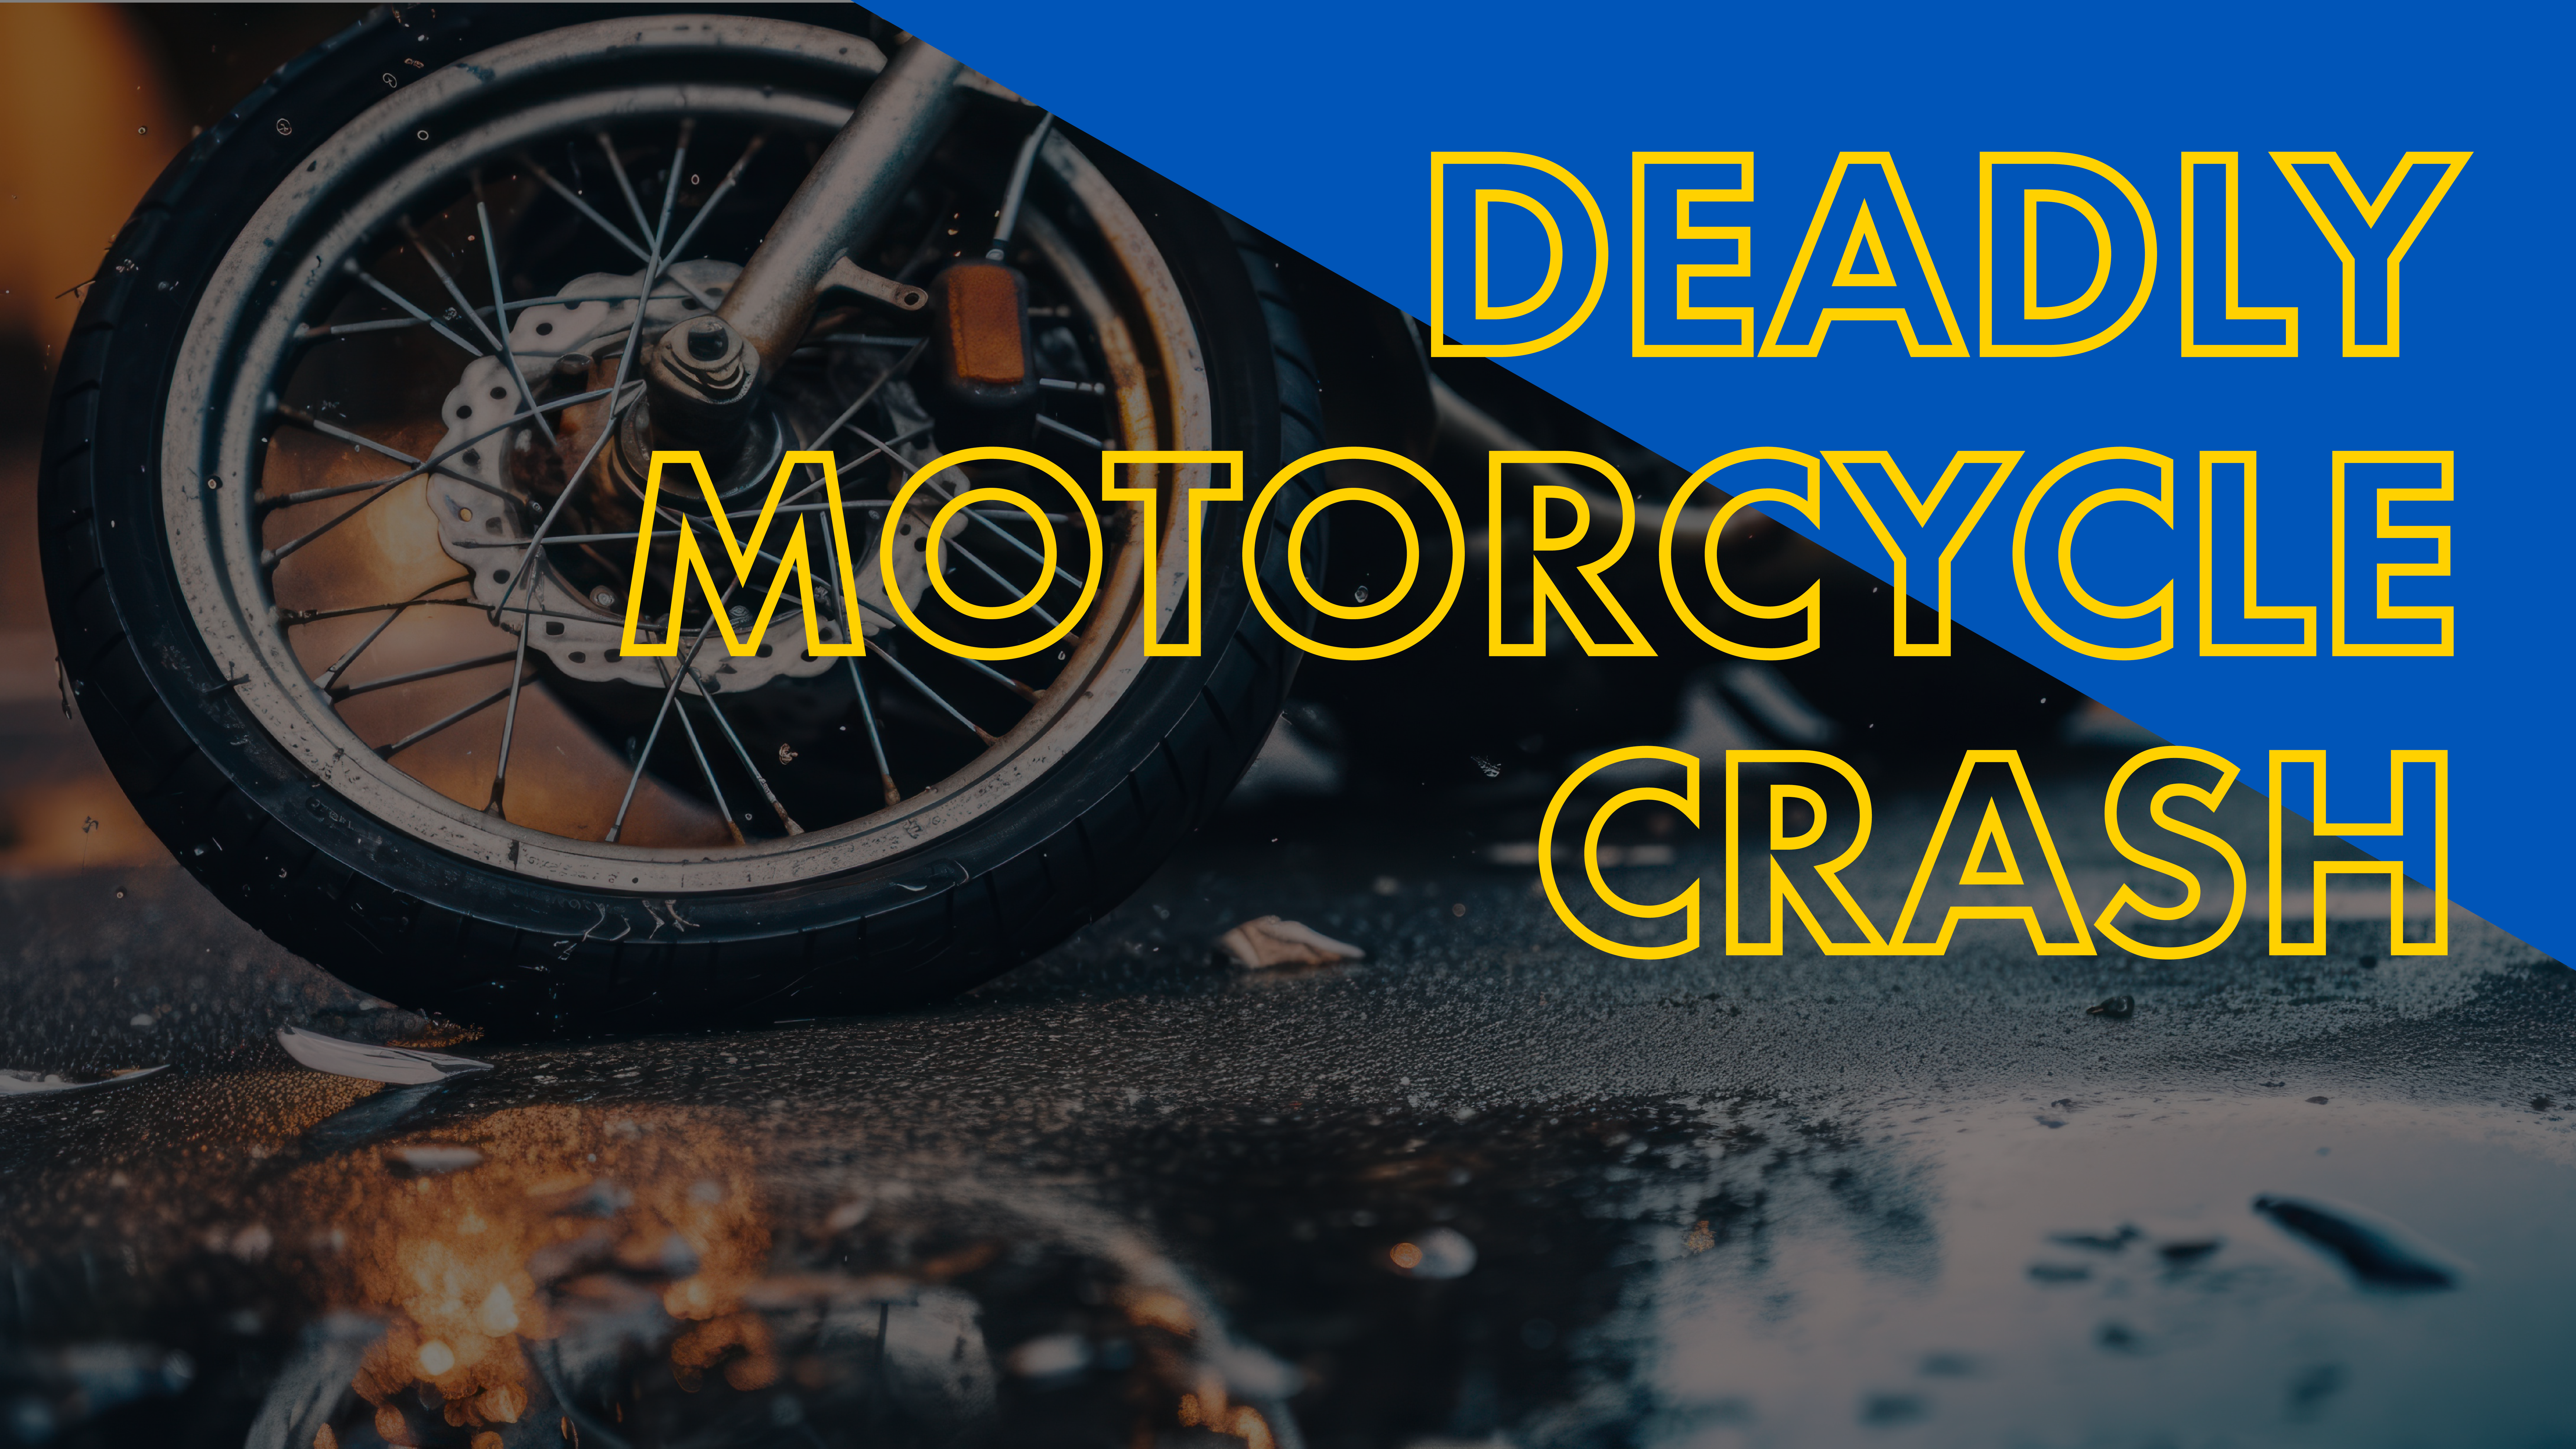 Evart motorcyclist killed after trying to avoid deer in the road